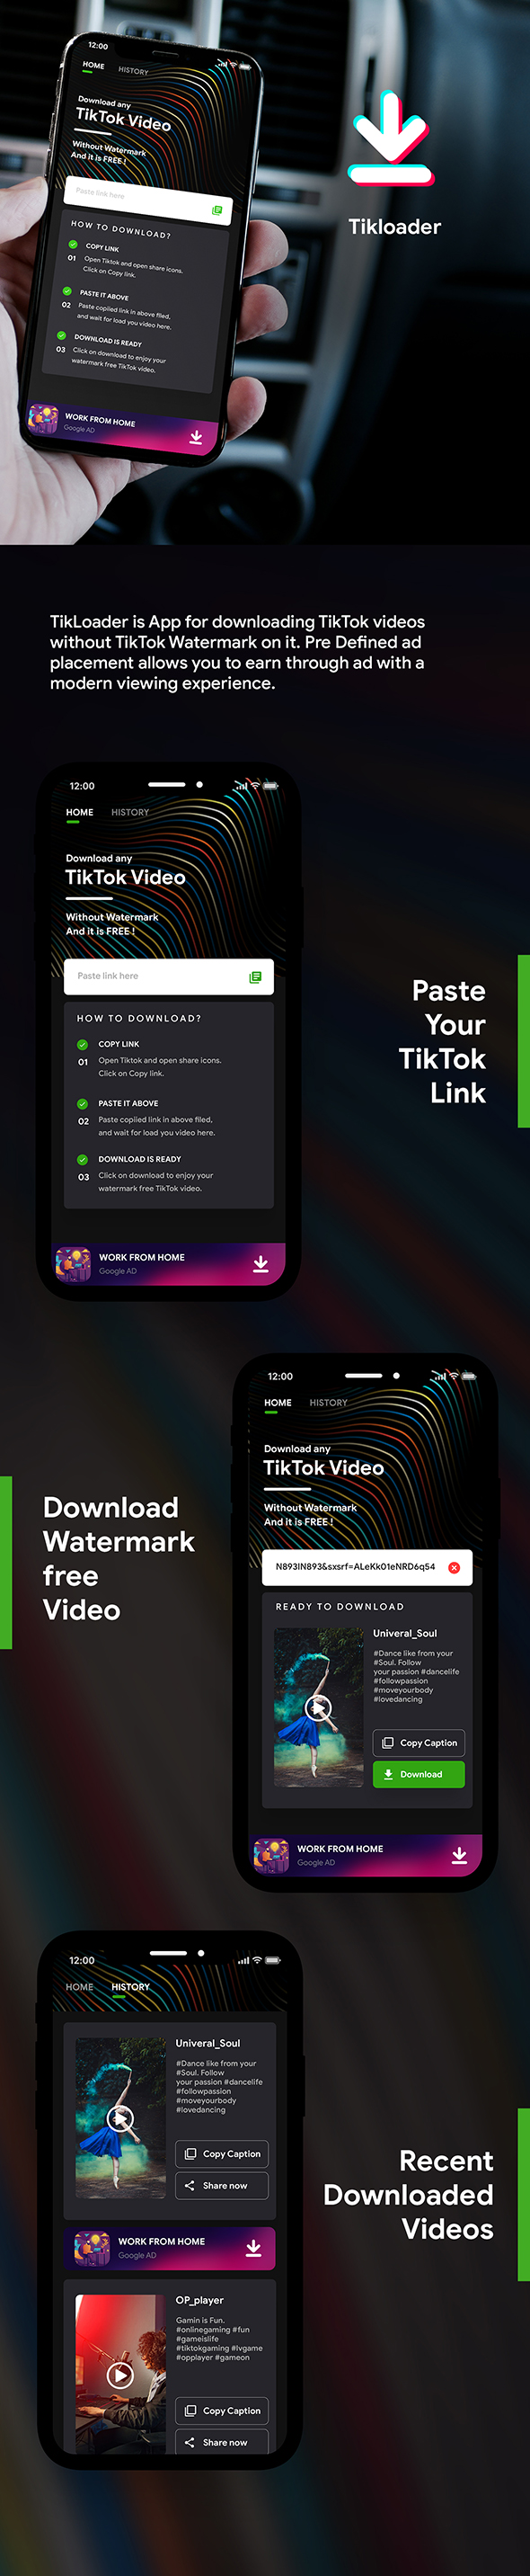 TikTok Video Downloader Android app without watermark with admob |  Tikloader |  Full app - 2